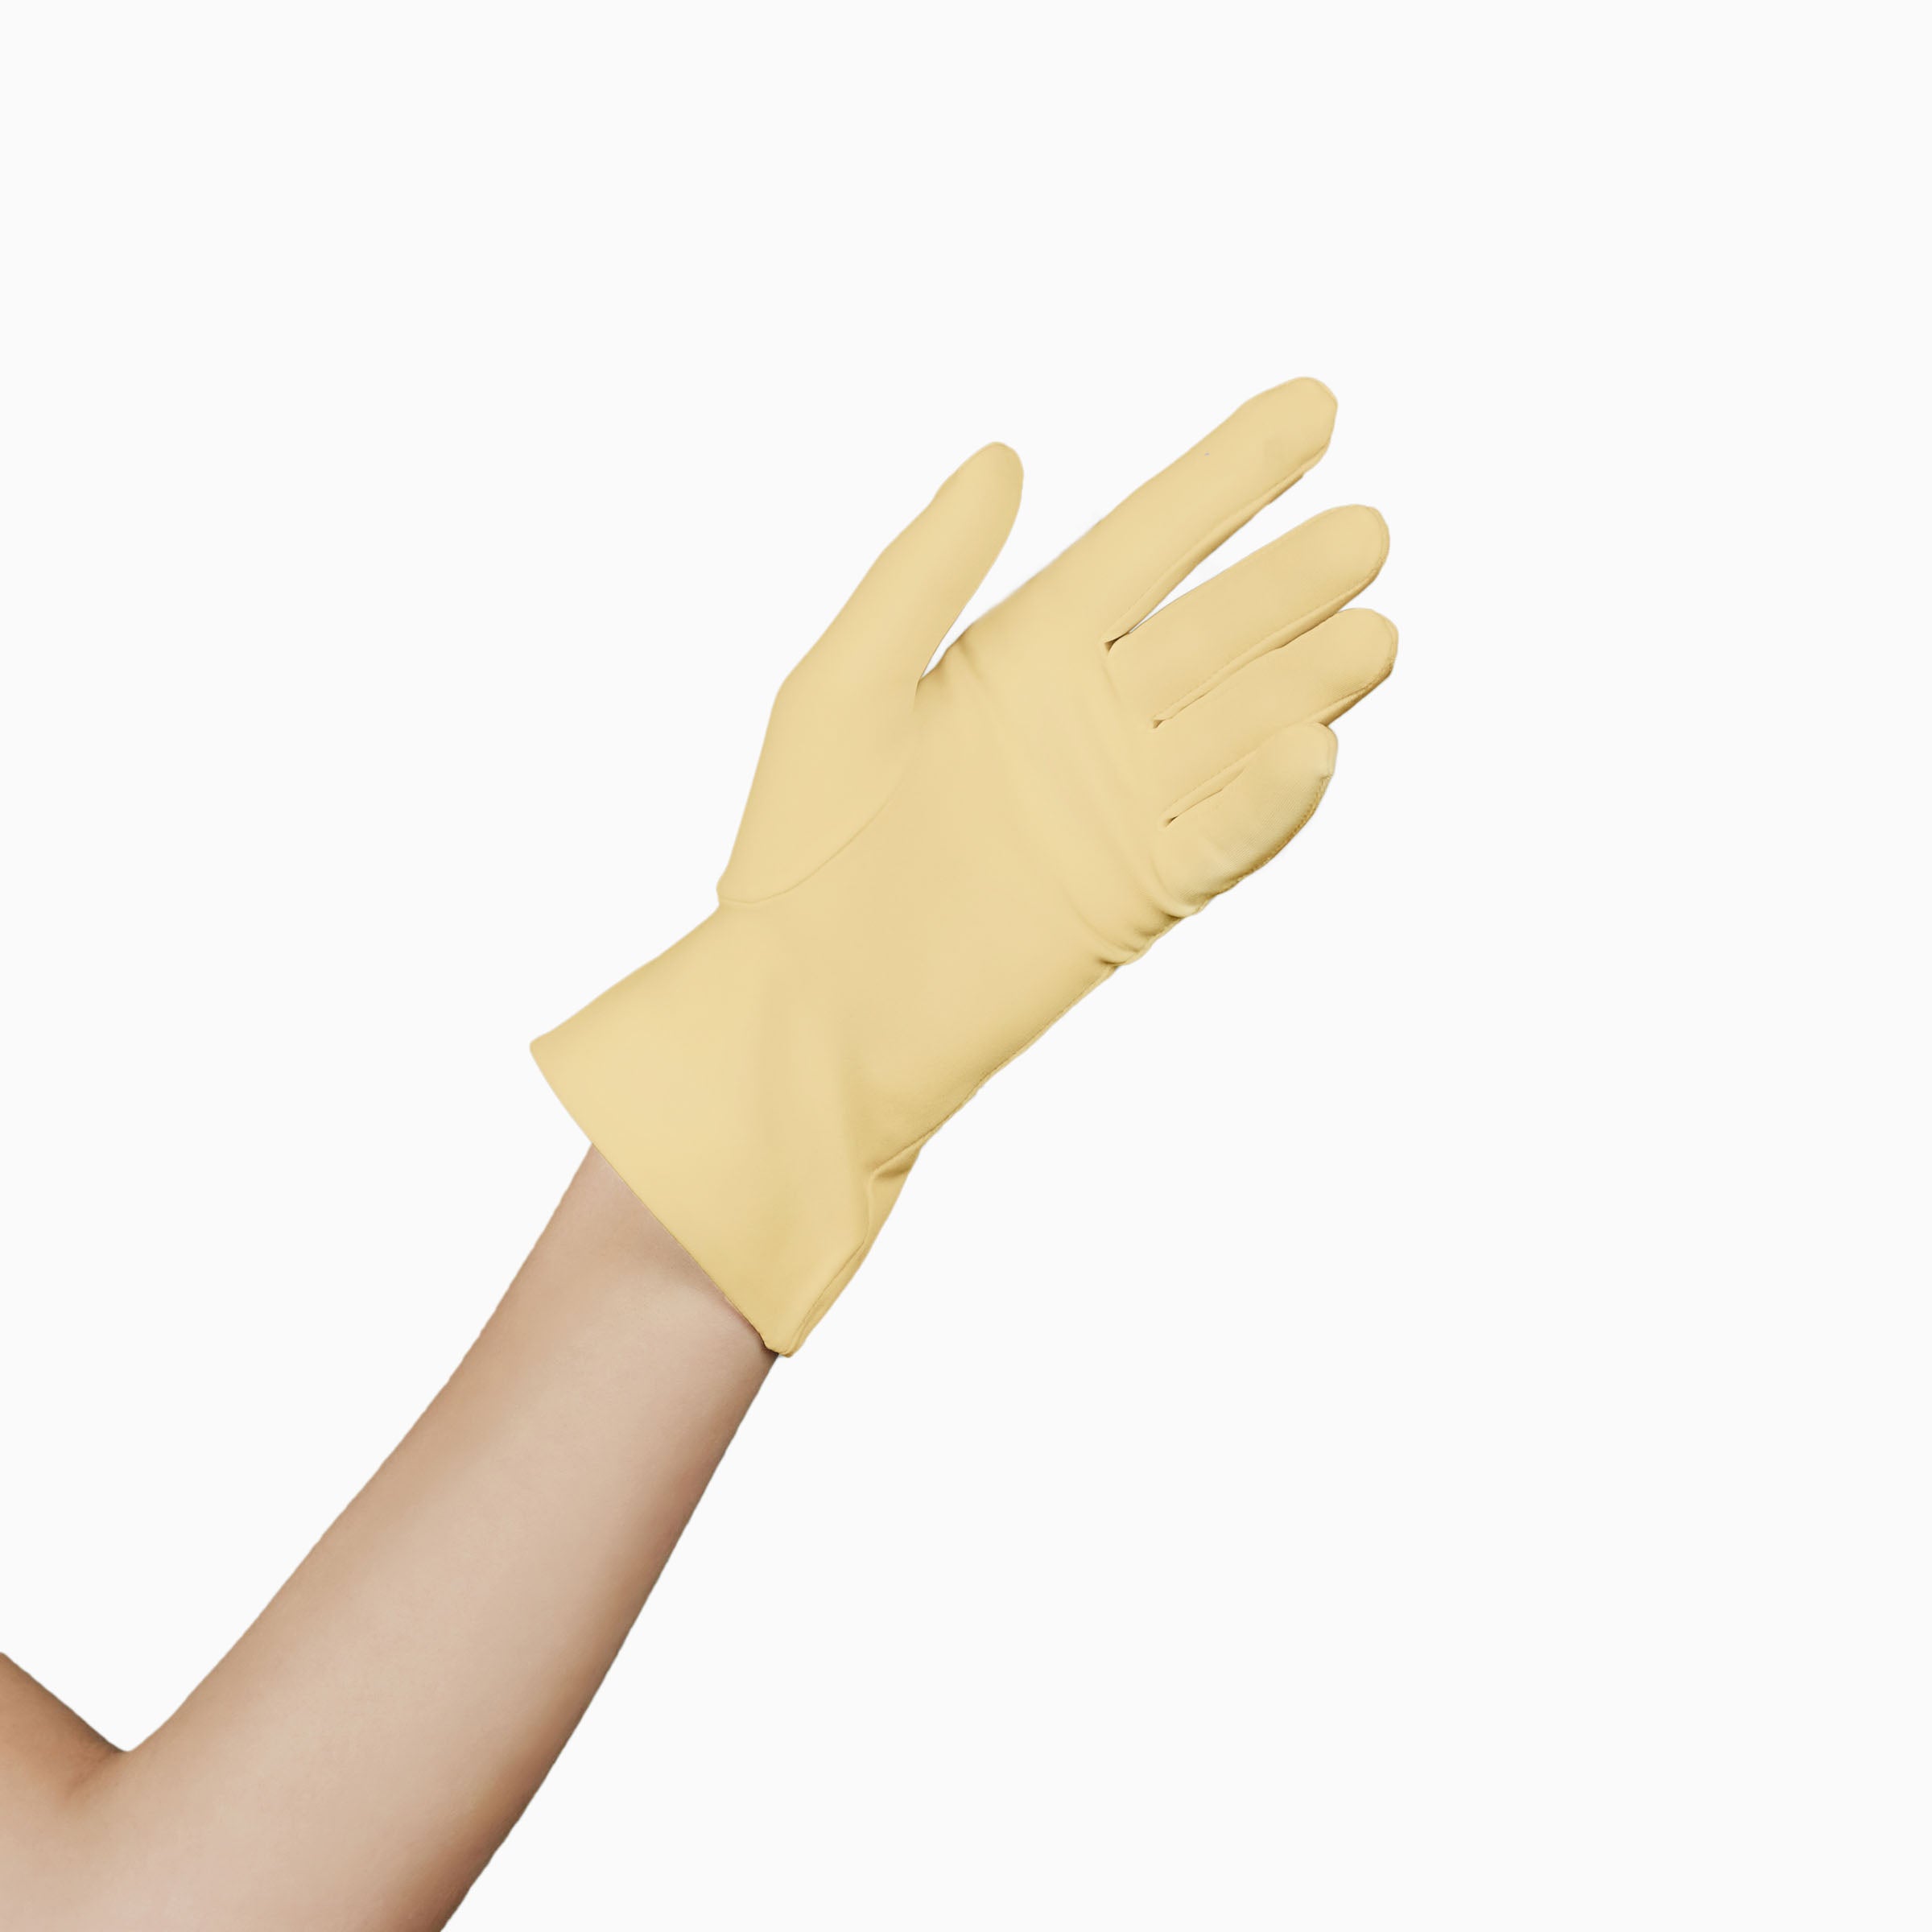 THE ISABELLE wrist dress day glove in yellow showing open palm.